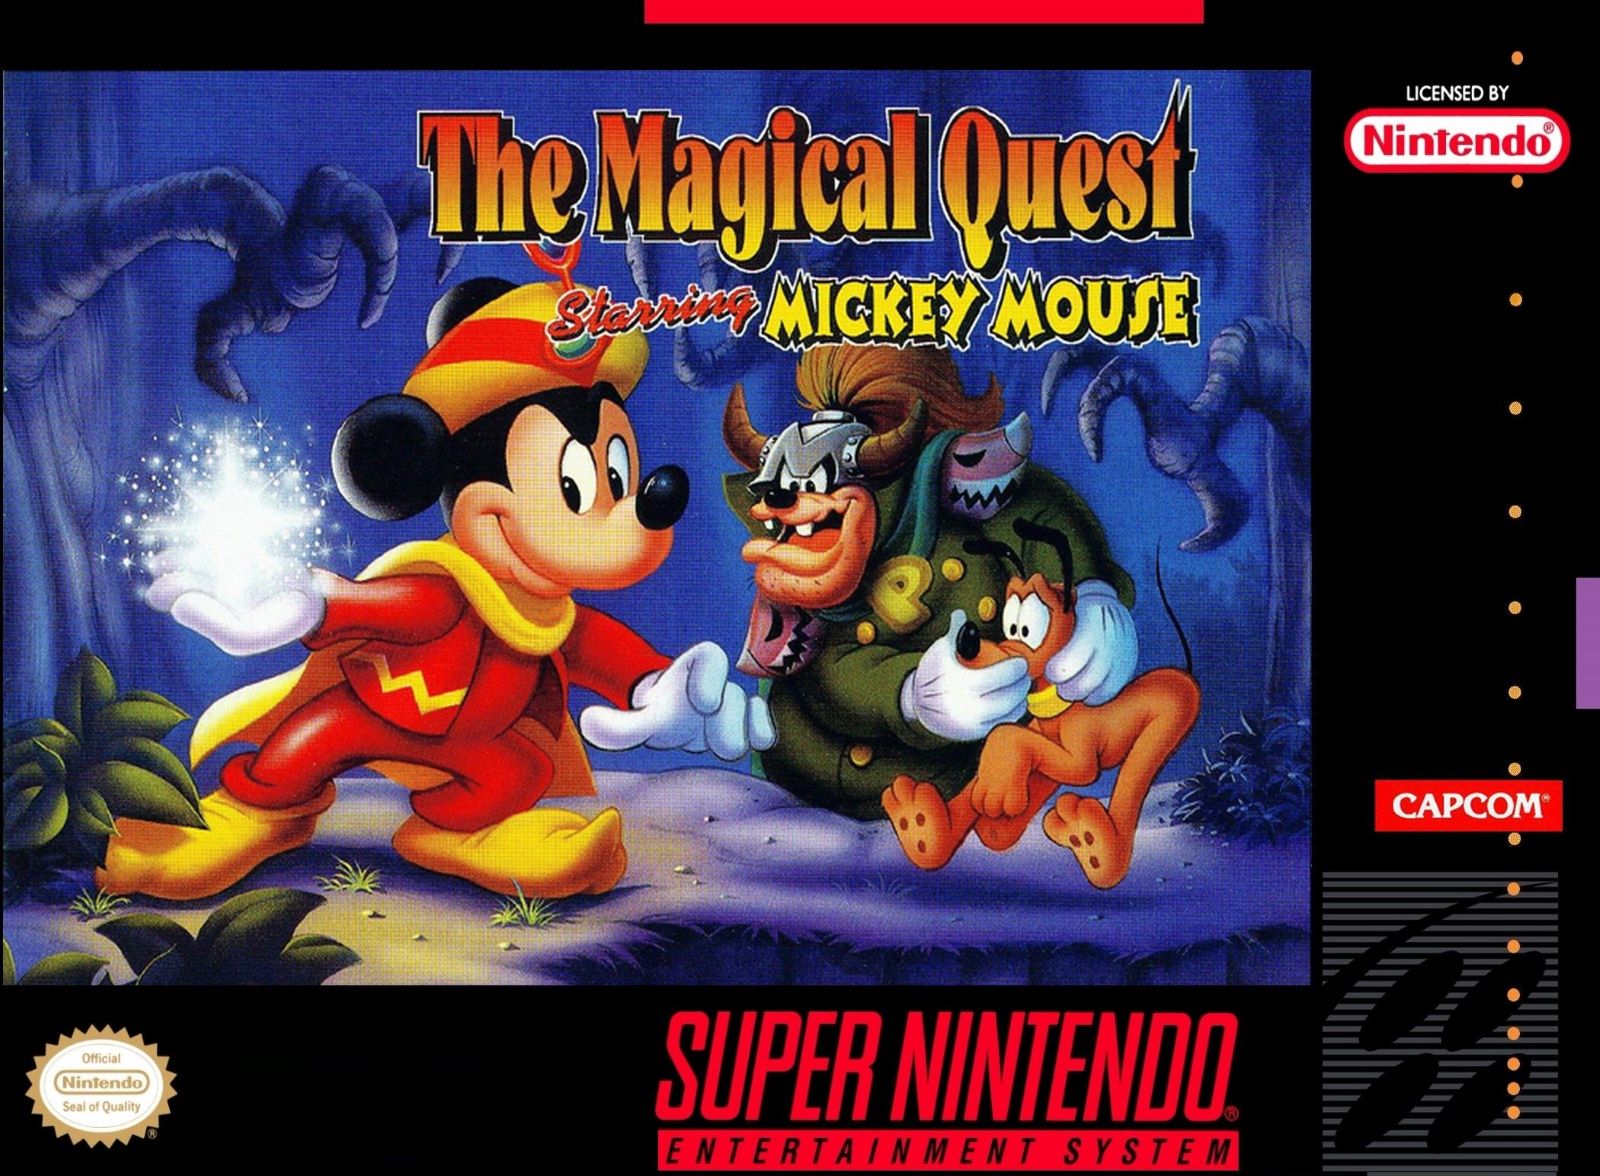 The Magical Quest - Starring Mickey Mouse - [SNES]